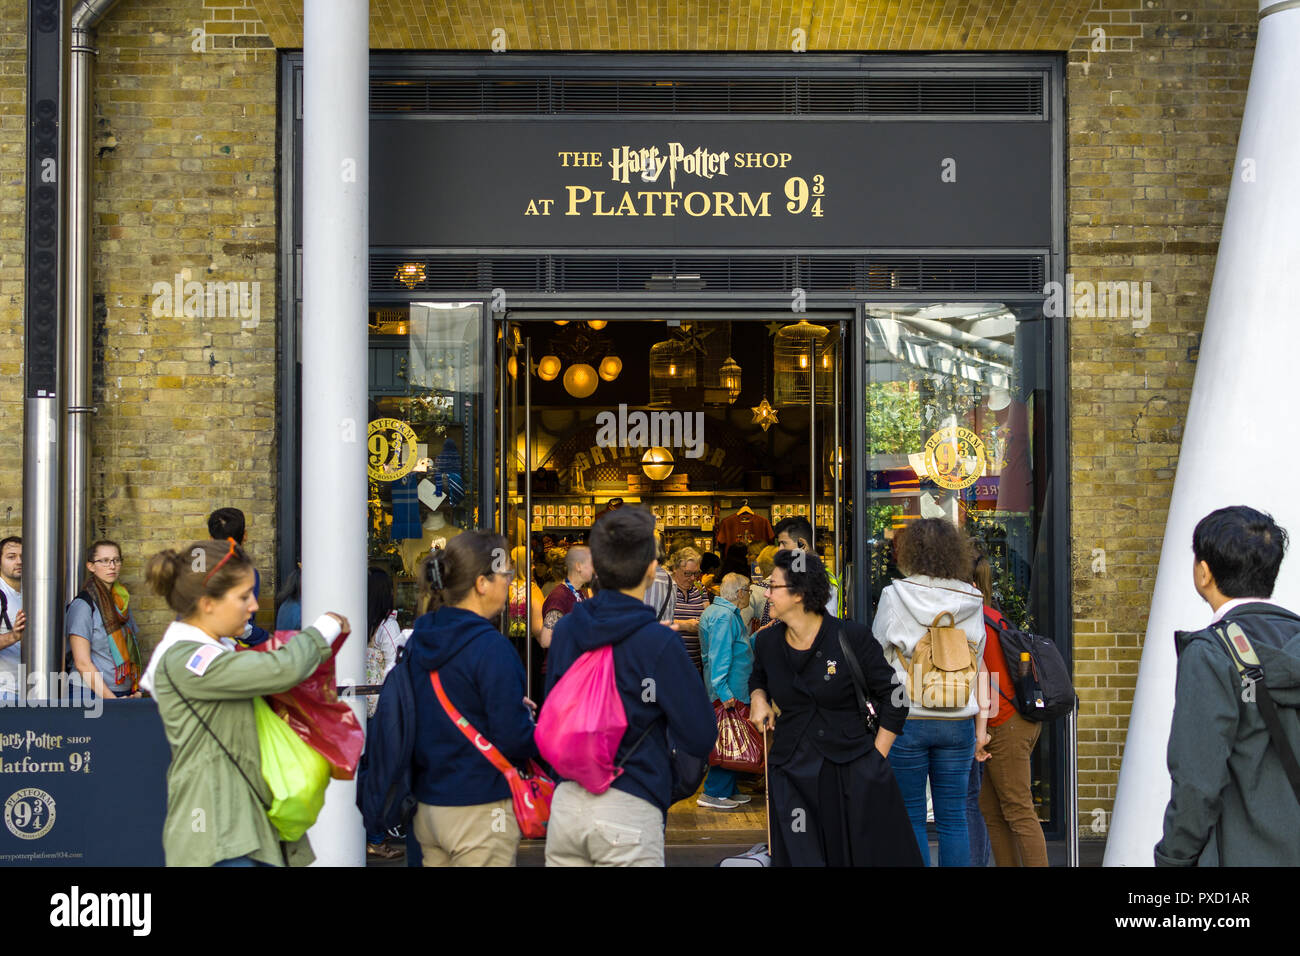 The Harry Potter Shop at Platform 9 ¾ Kings Cross Station entrance with shoppers browsing and queueing outside, London, UK Stock Photo